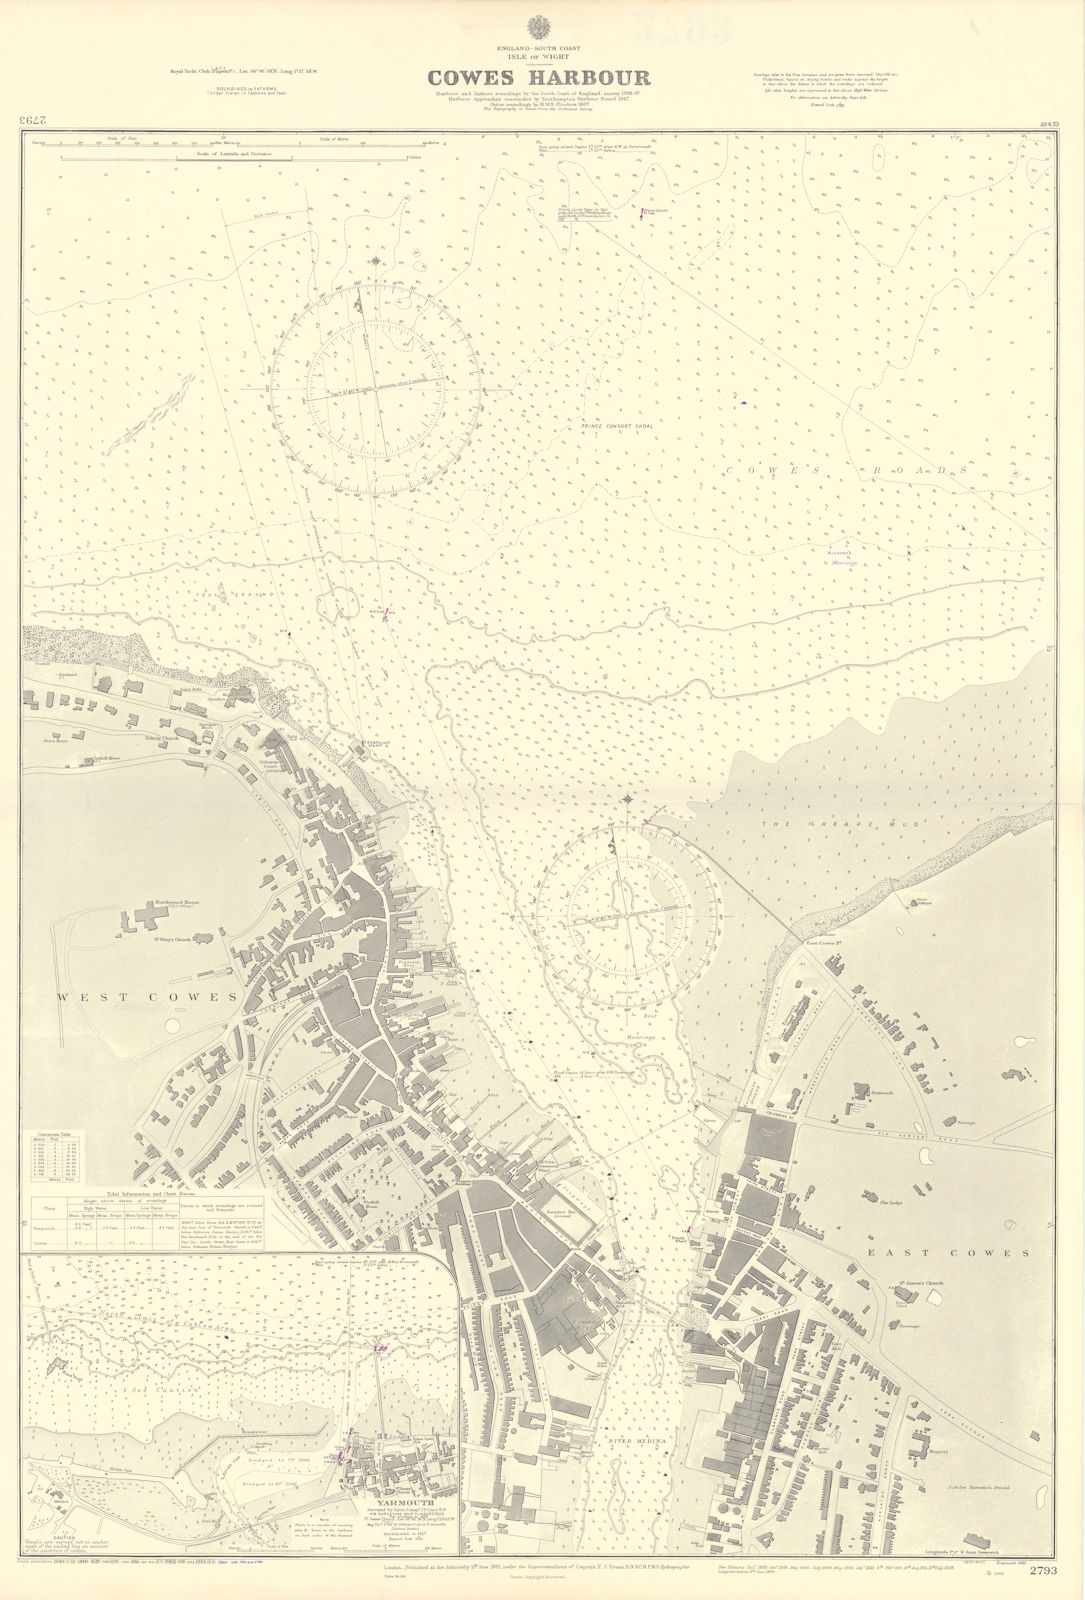 Cowes harbour, Isle of Wight. Yarmouth. ADMIRALTY sea chart 1881 (1954) map